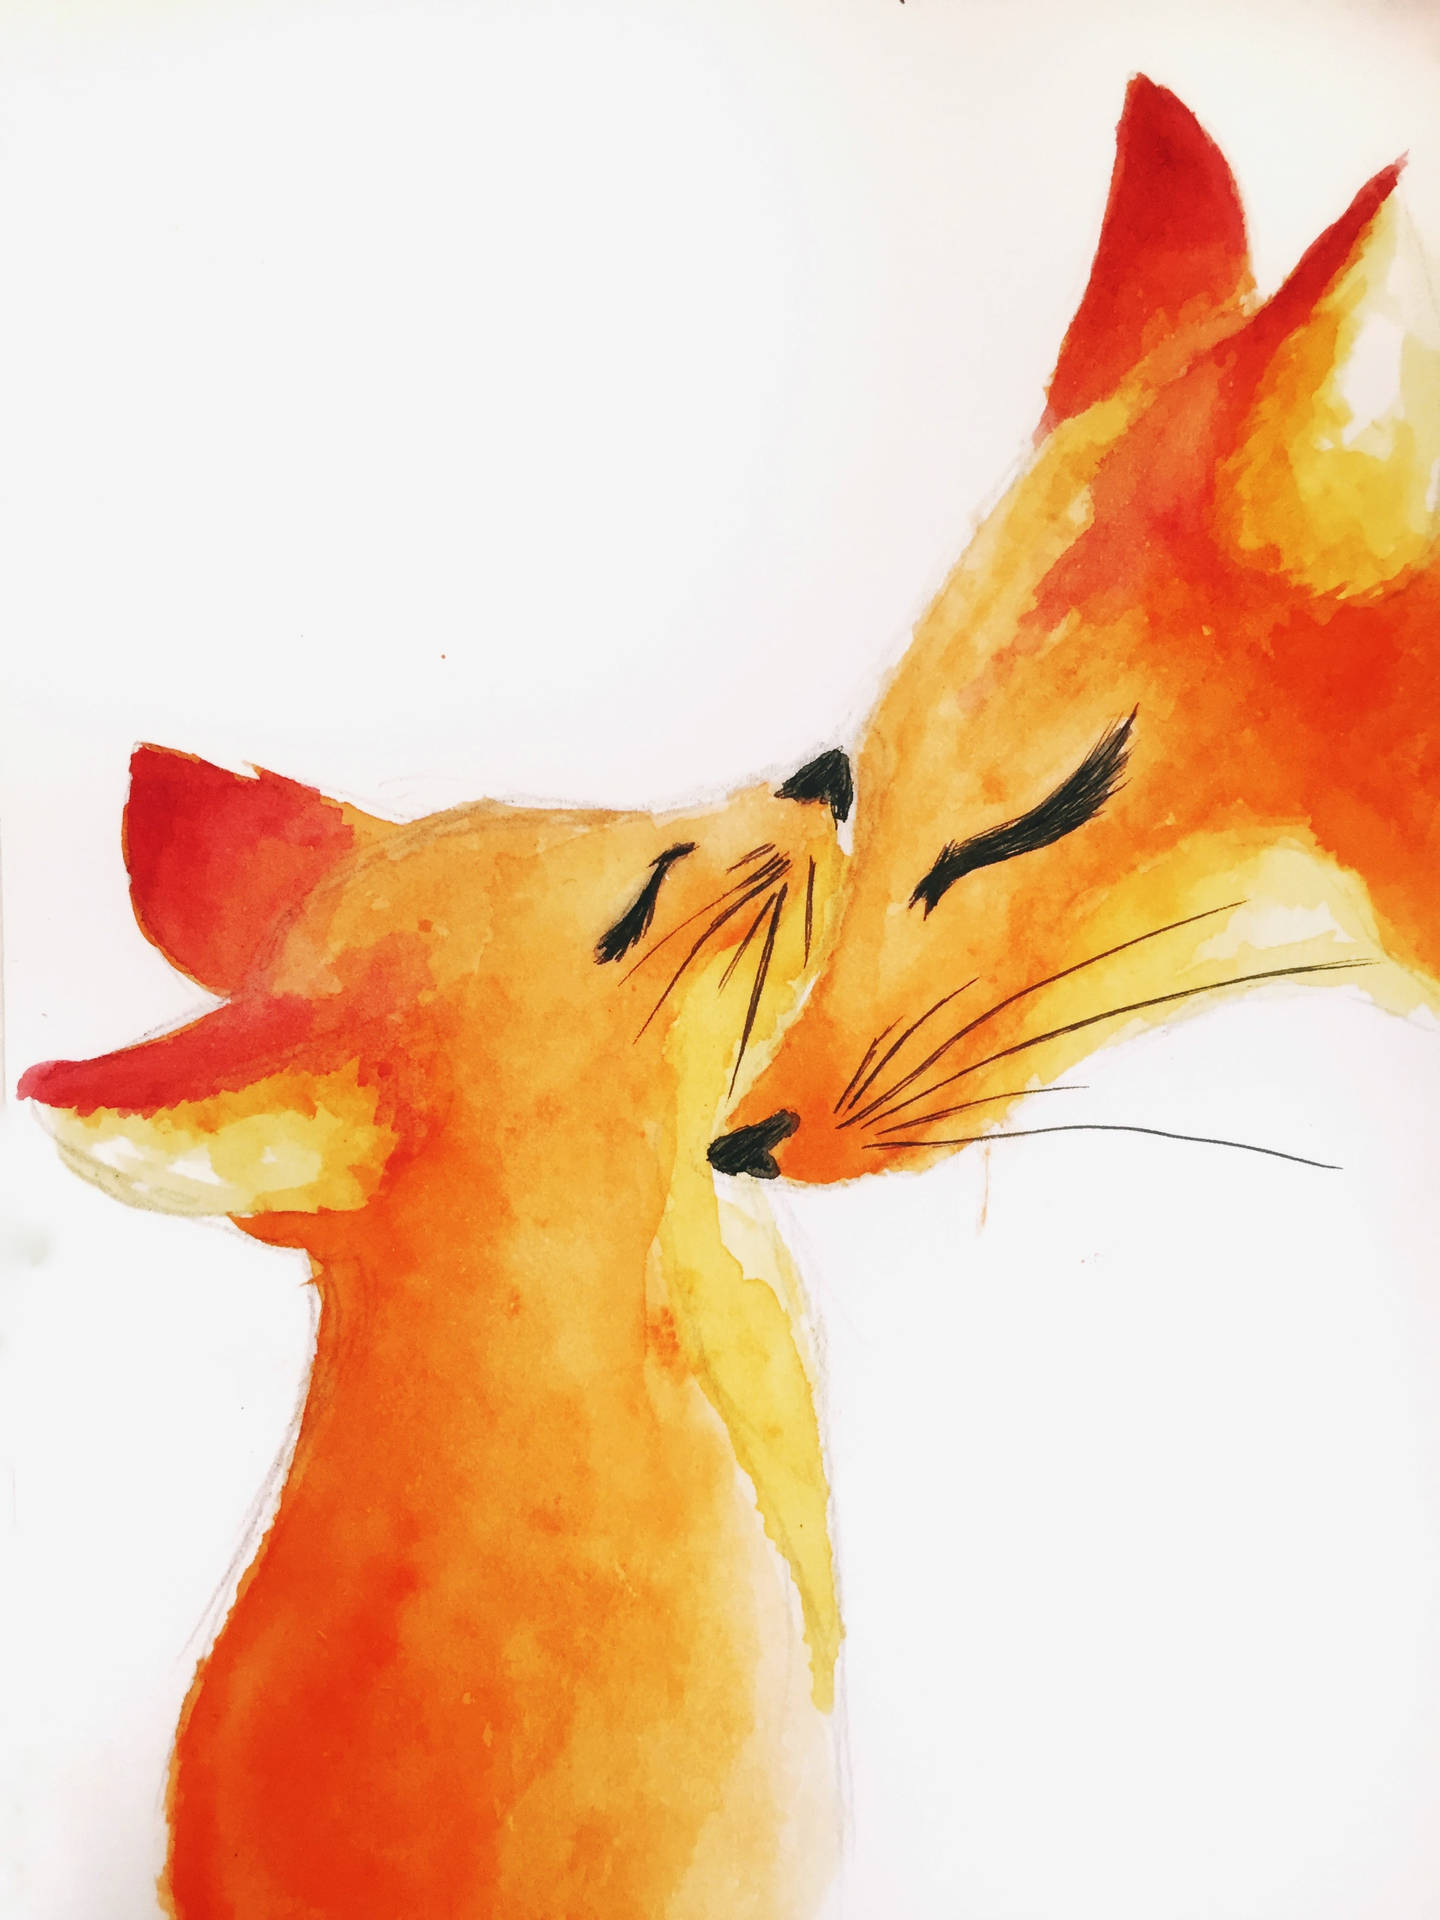 Mother Fox Loving Daughter Fox Watercolor Painting Background